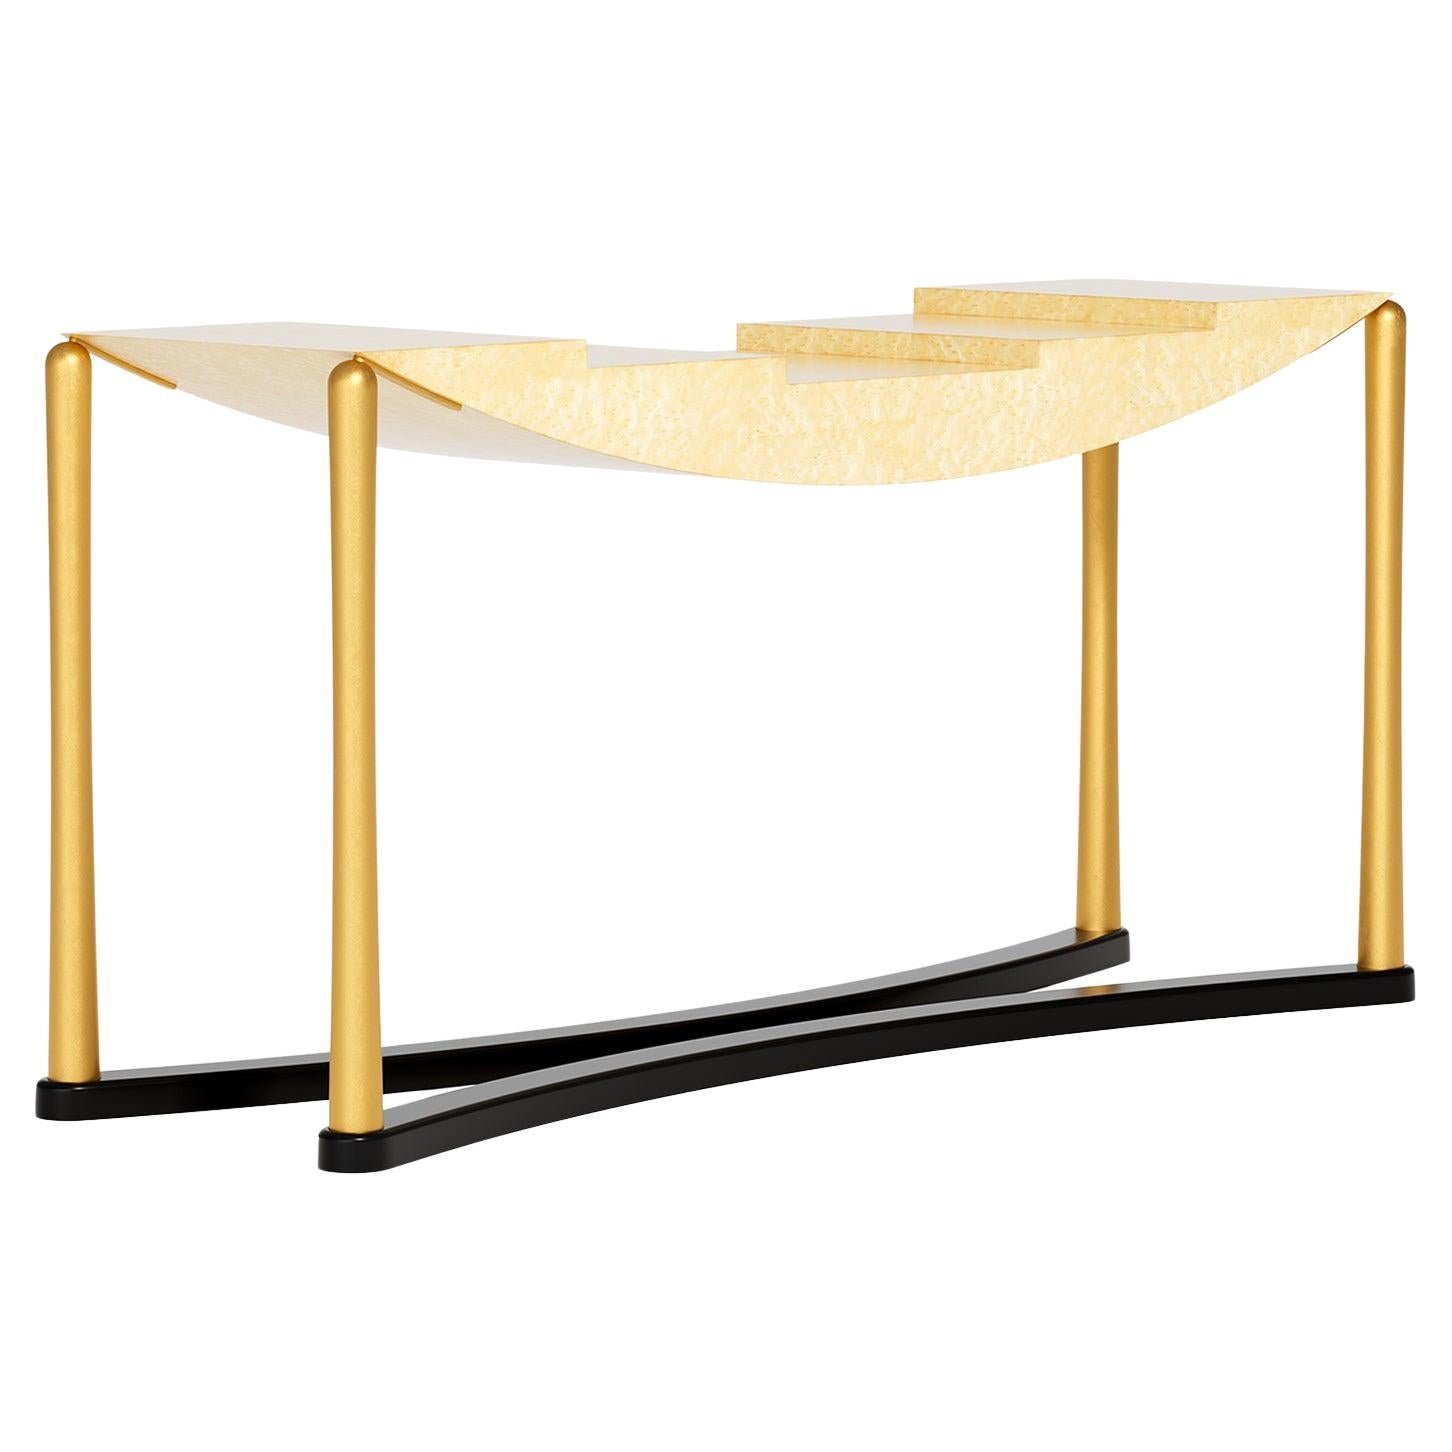 Schwarzenberg Console Table By Hans Hollein for Memphis Milano Collection For Sale